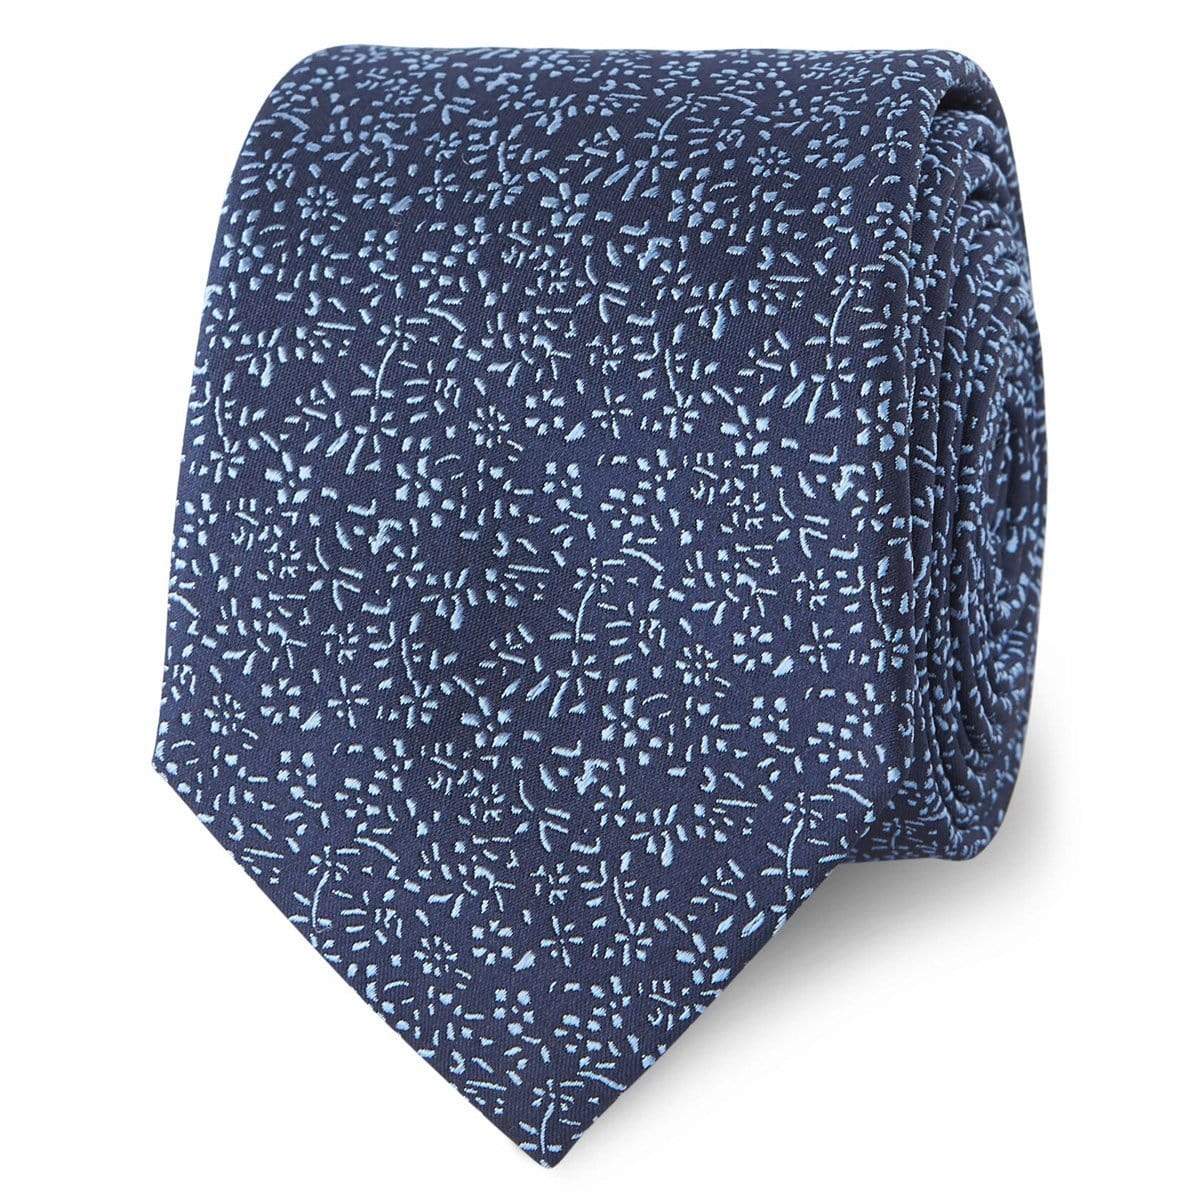 T.M.Lewin-Ditsy-Floral-Tie-Navy-and-Blue-70585-002